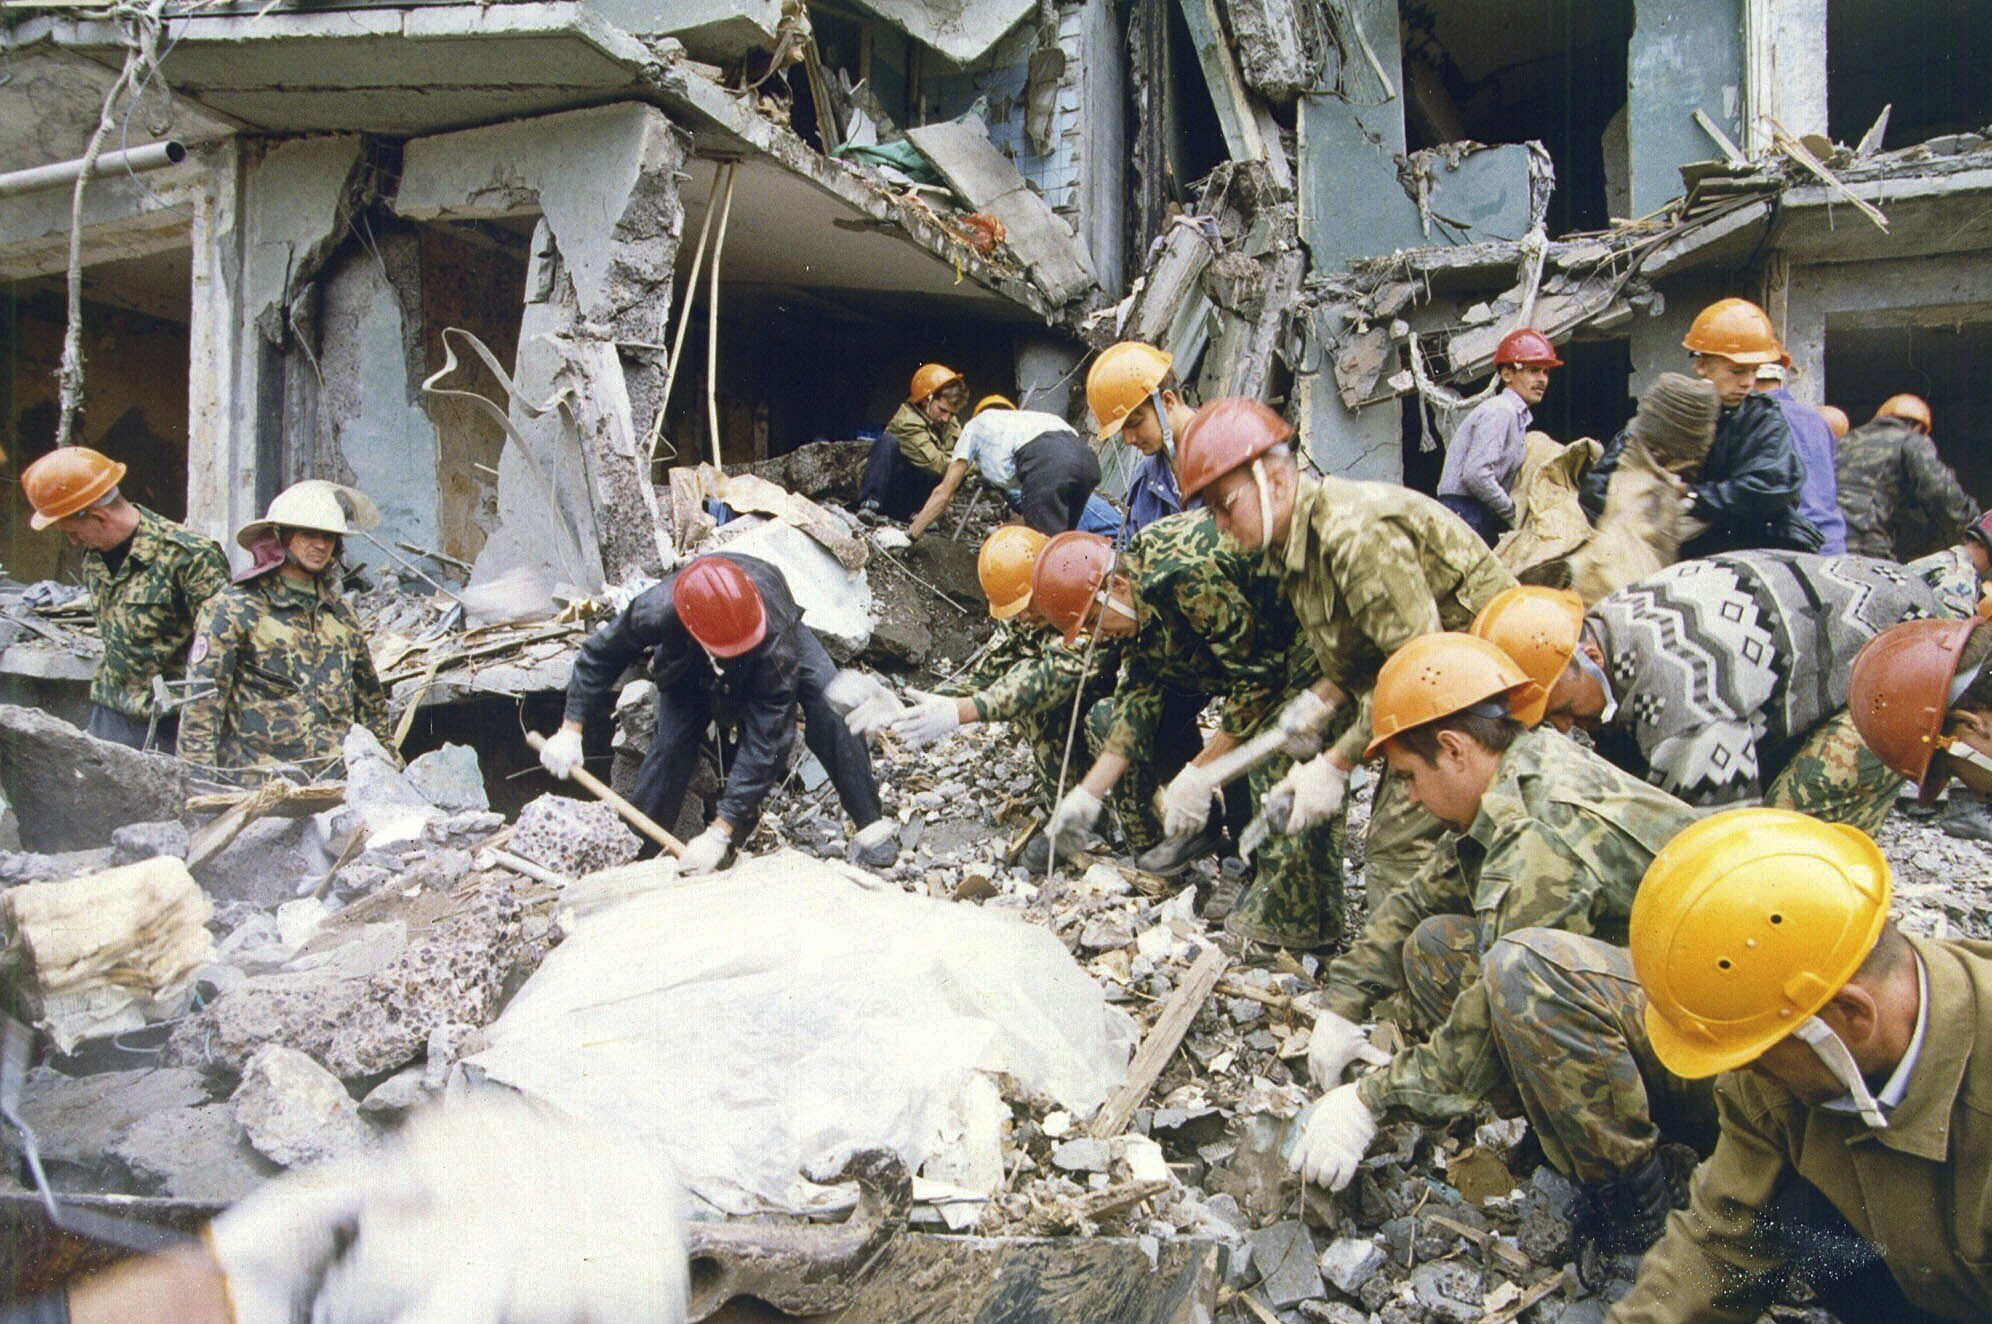 FILE - Rescue workers shuffle the rubble at a devastated apartment building in the city of Volgodonsk, close to Russia's Caucasus Mountains region, Thursday, Sept. 16, 1999. The attack on a Moscow concert hall in which armed men opened fire and set the building ablaze, killing over 130 people, was the latest in a long series of bombings and sieges that have unsettled and outraged Russians during Vladimir Putin’s nearly quarter-century as either prime minister or president. (AP Photo/Sergei Venyavsky, File)